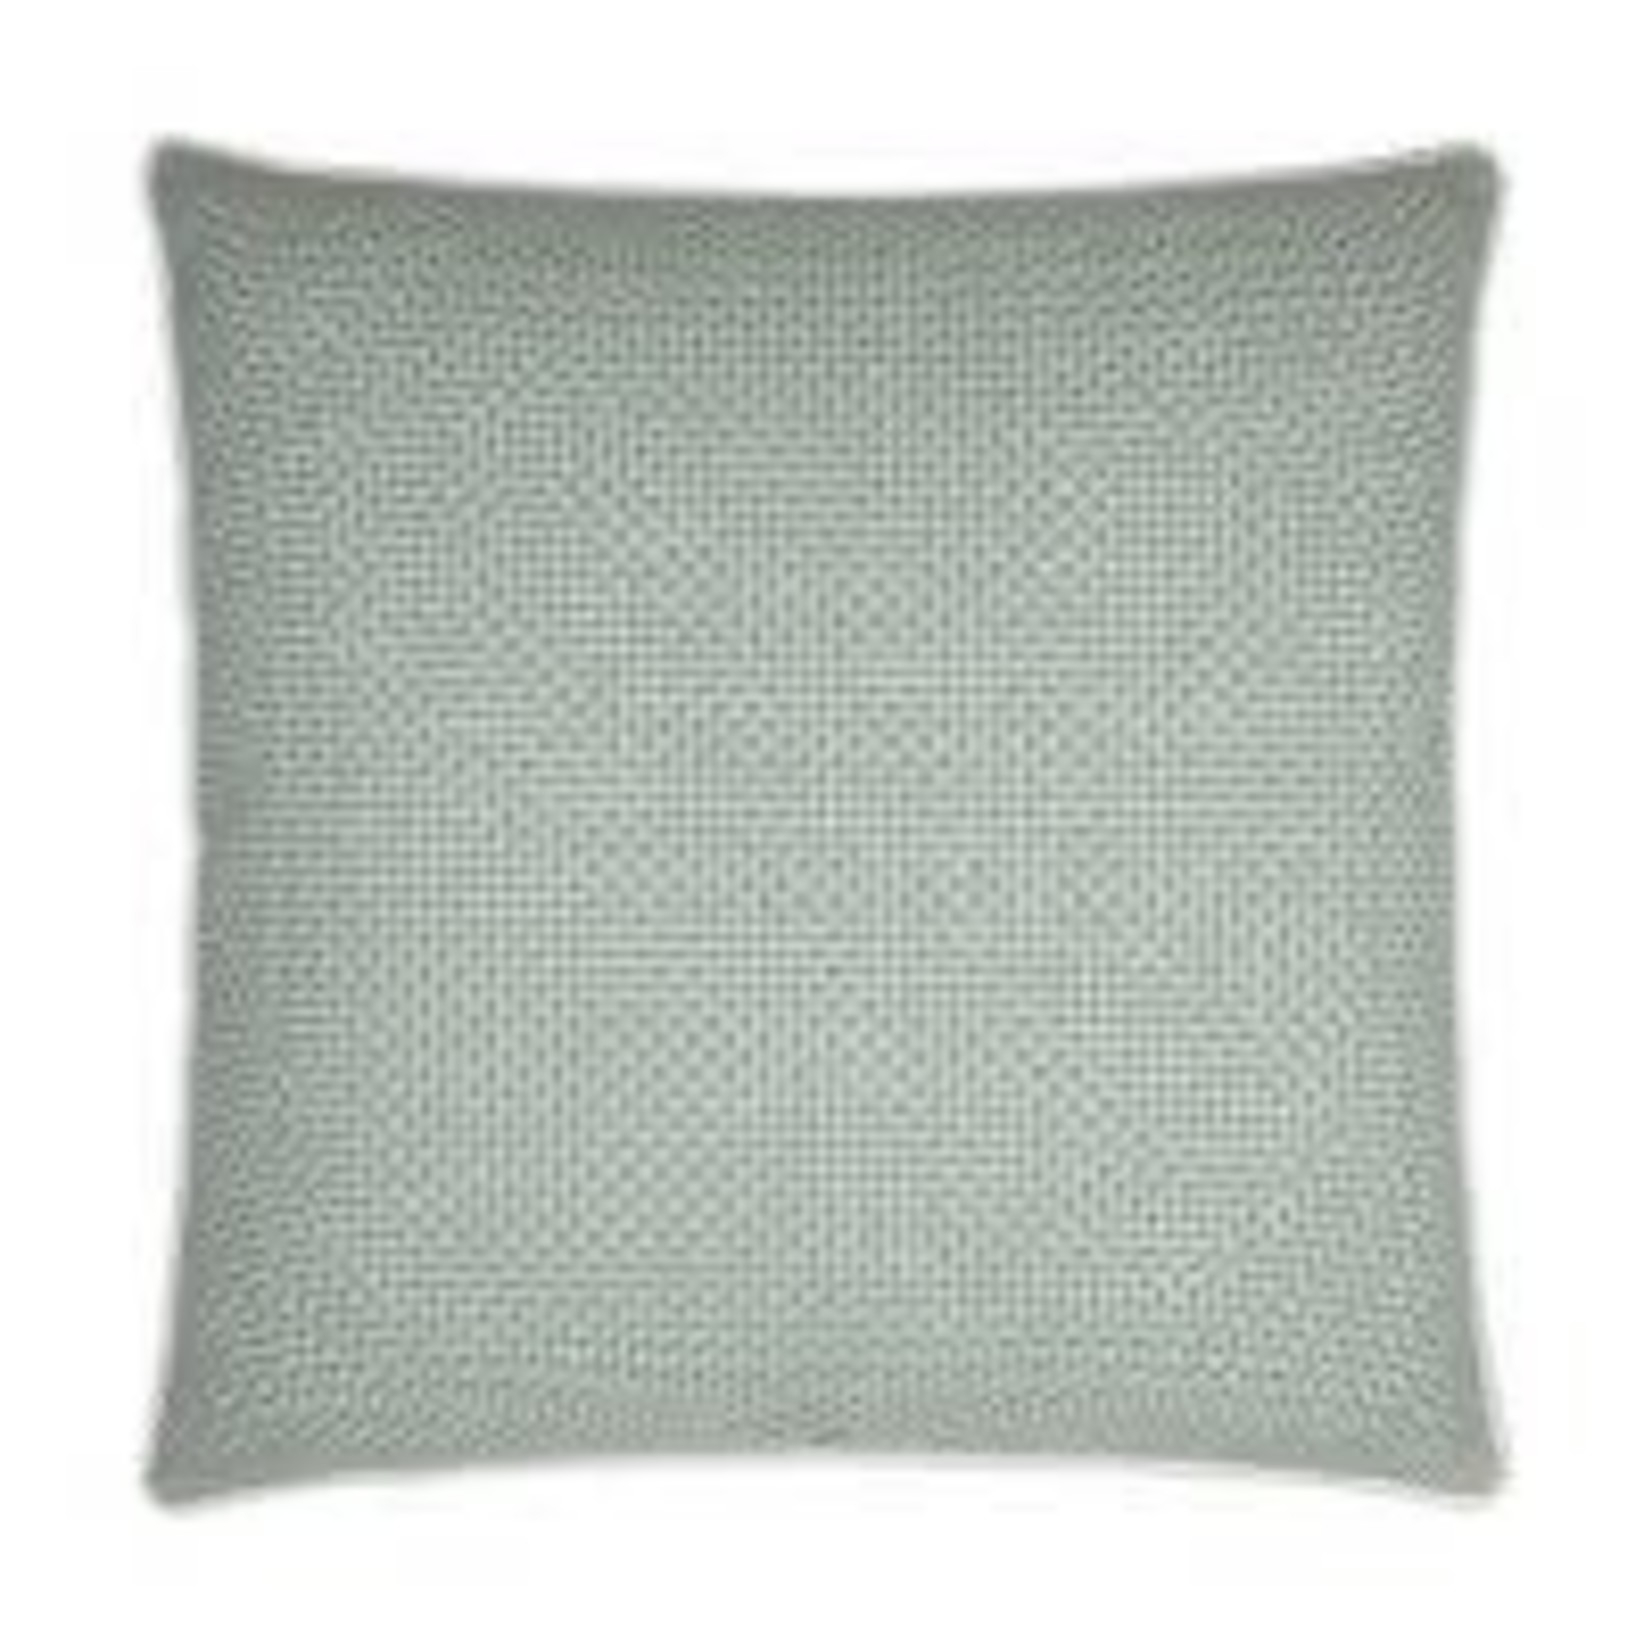 Outside The Box 24x24 Kristal Square Feather Down Pillow In Aqua